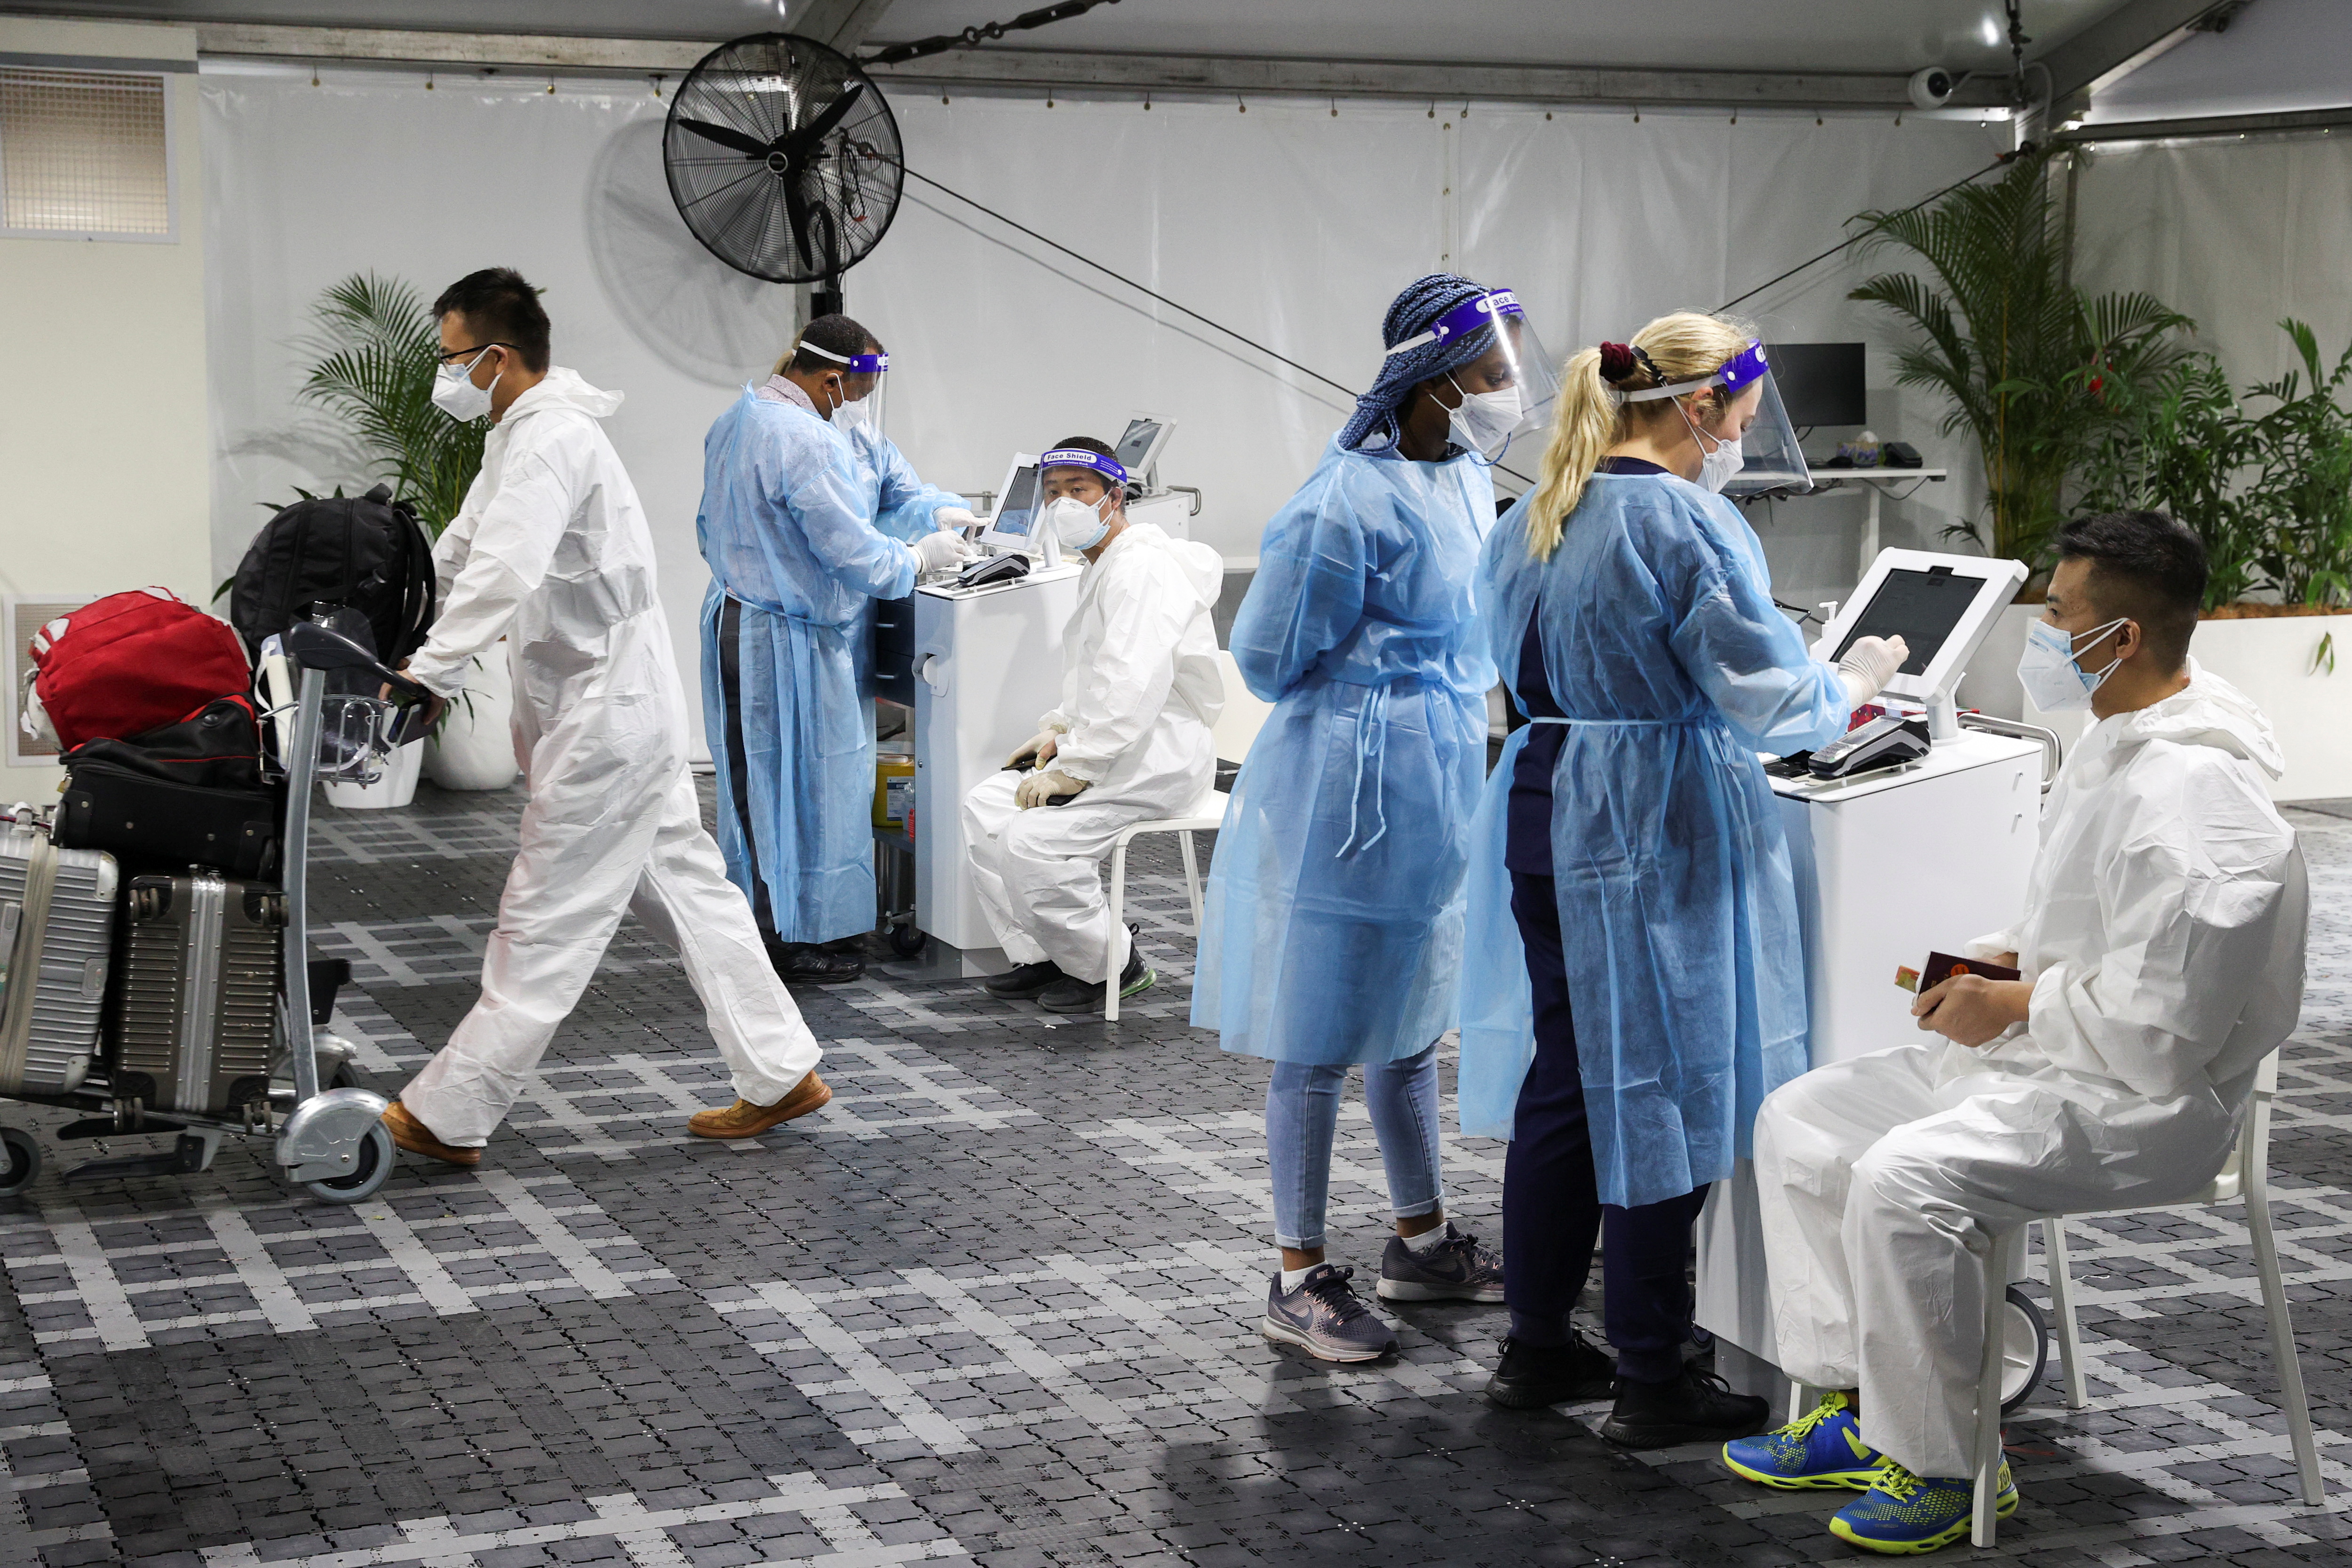 Travellers receive tests for the coronavirus disease (COVID-19) at a pre-departure testing facility, as countries react to the new coronavirus Omicron variant, outside the international terminal at Sydney Airport in Sydney, Australia, November 29, 2021.  REUTERS/Loren Elliott